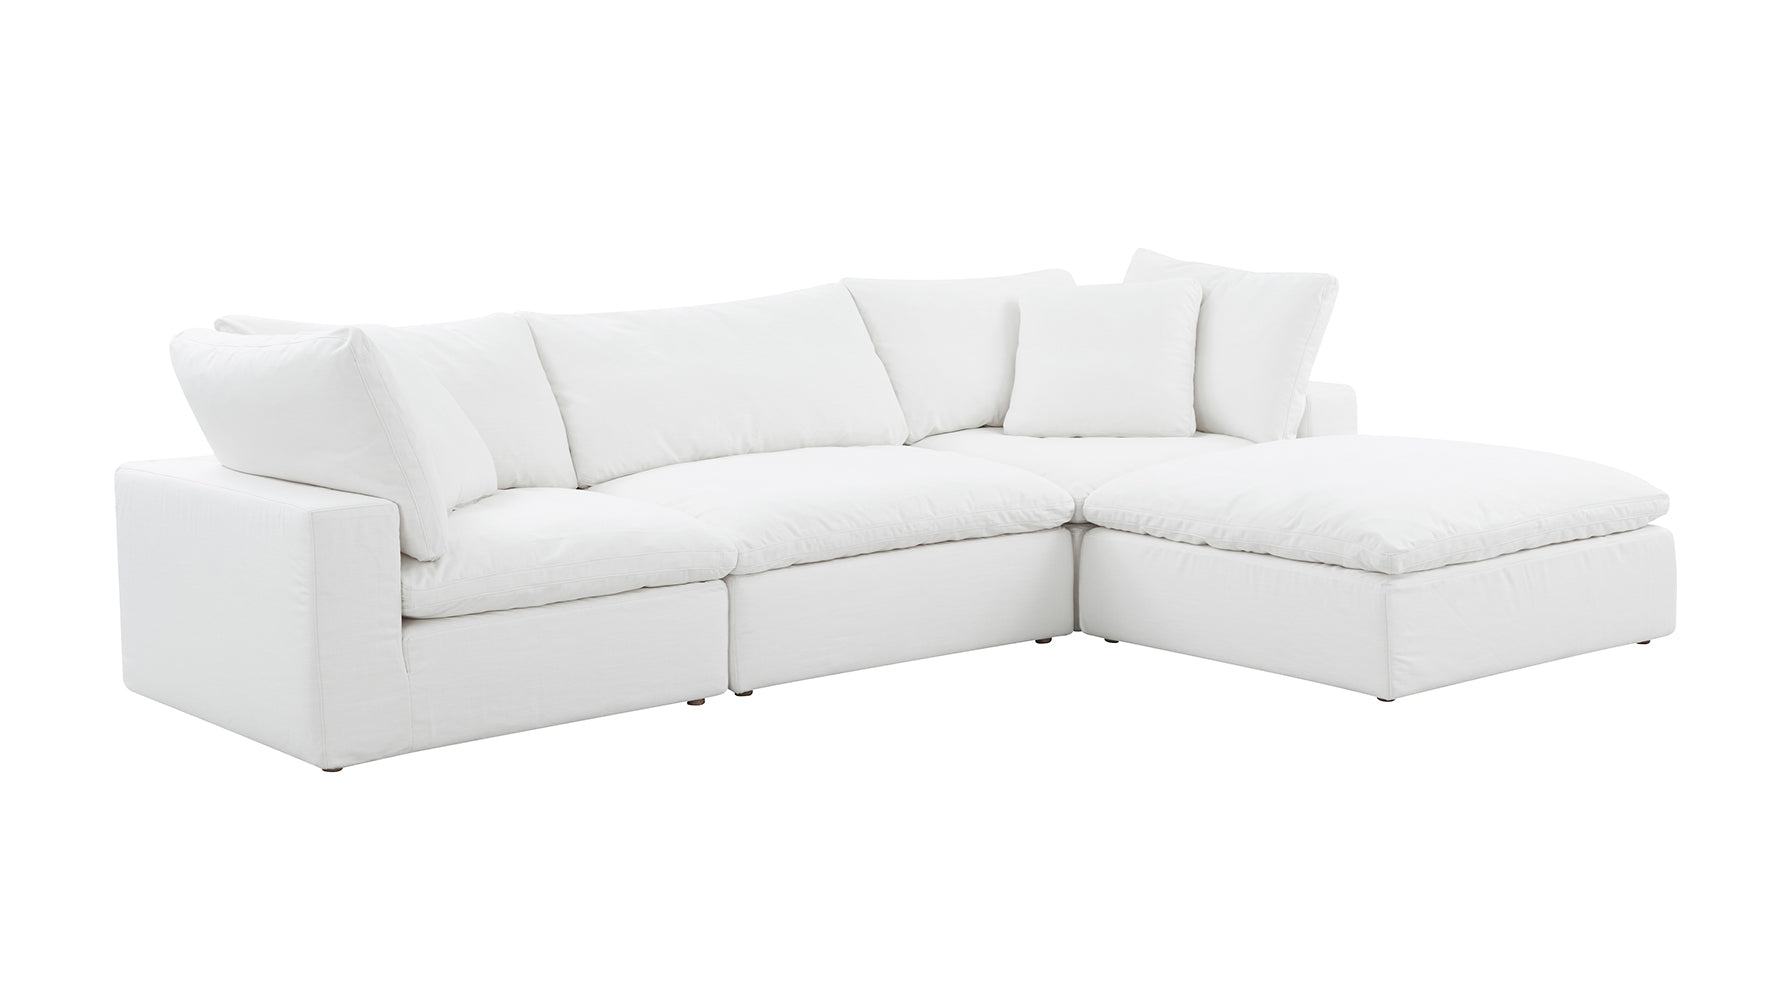 Movie Night™ 4-Piece Modular Sectional, Large, Brie - Image 3